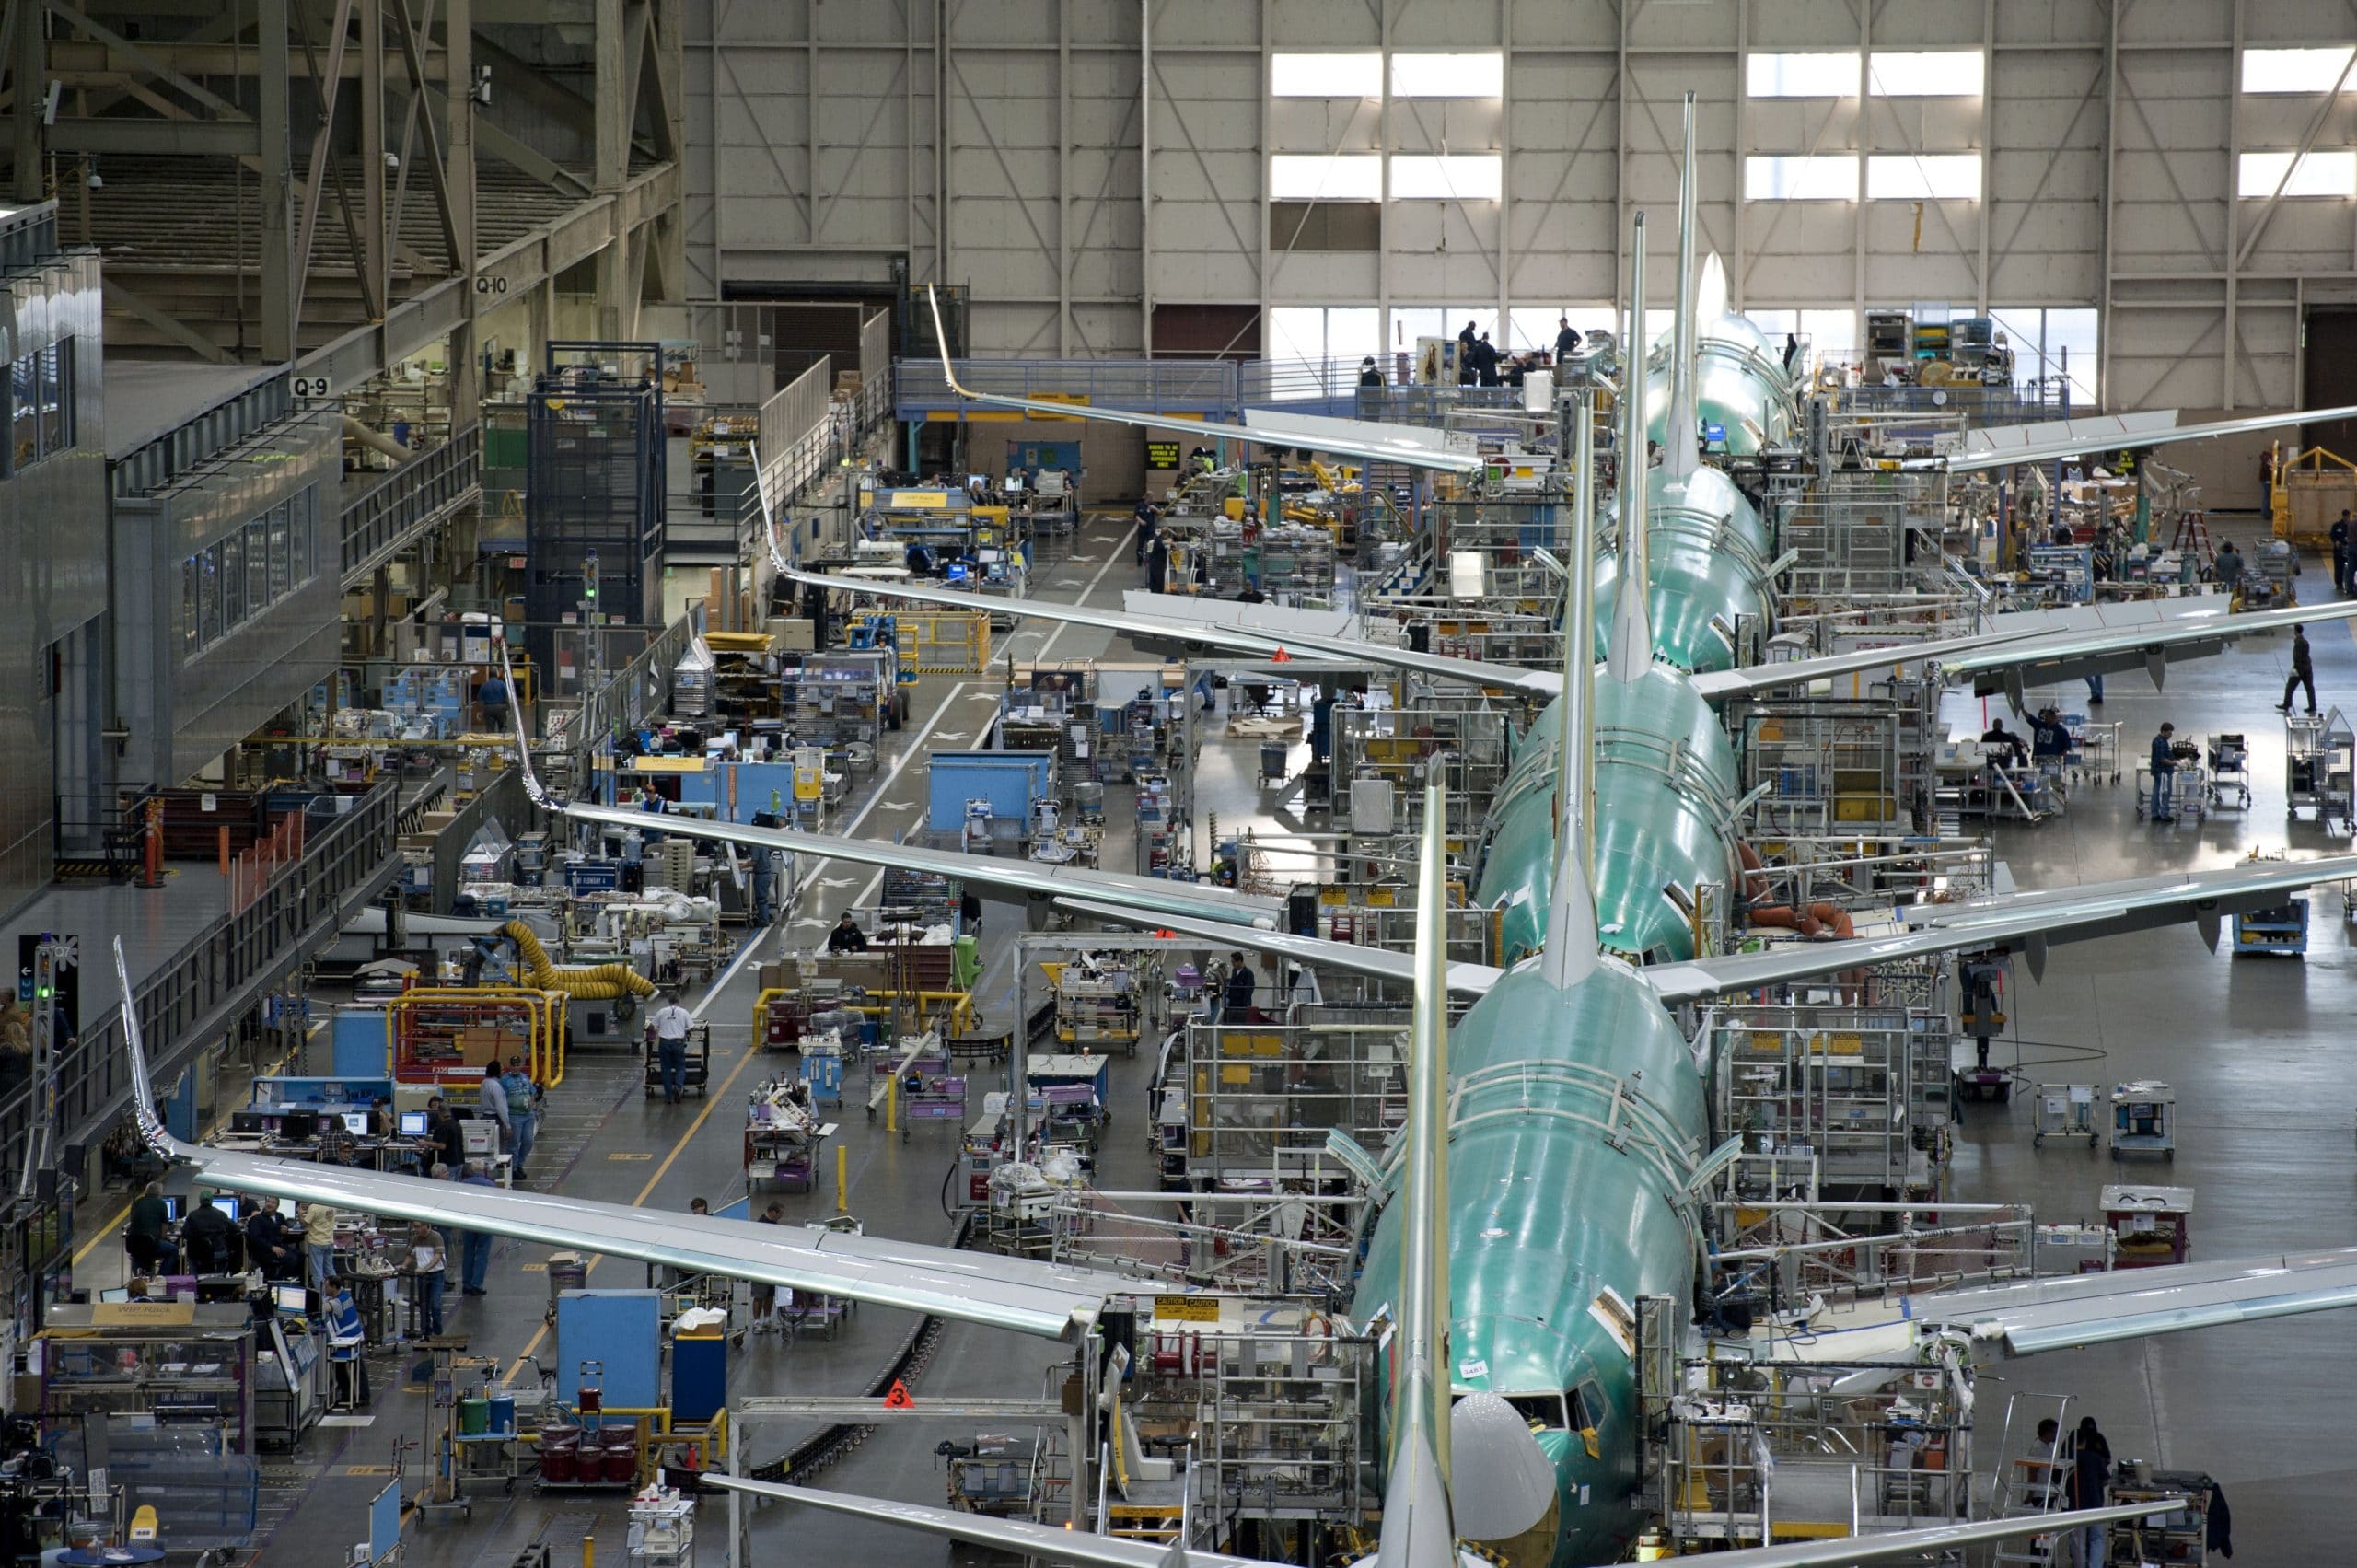 Boeing's 737 NG Assembly Line. Source: Boeing.